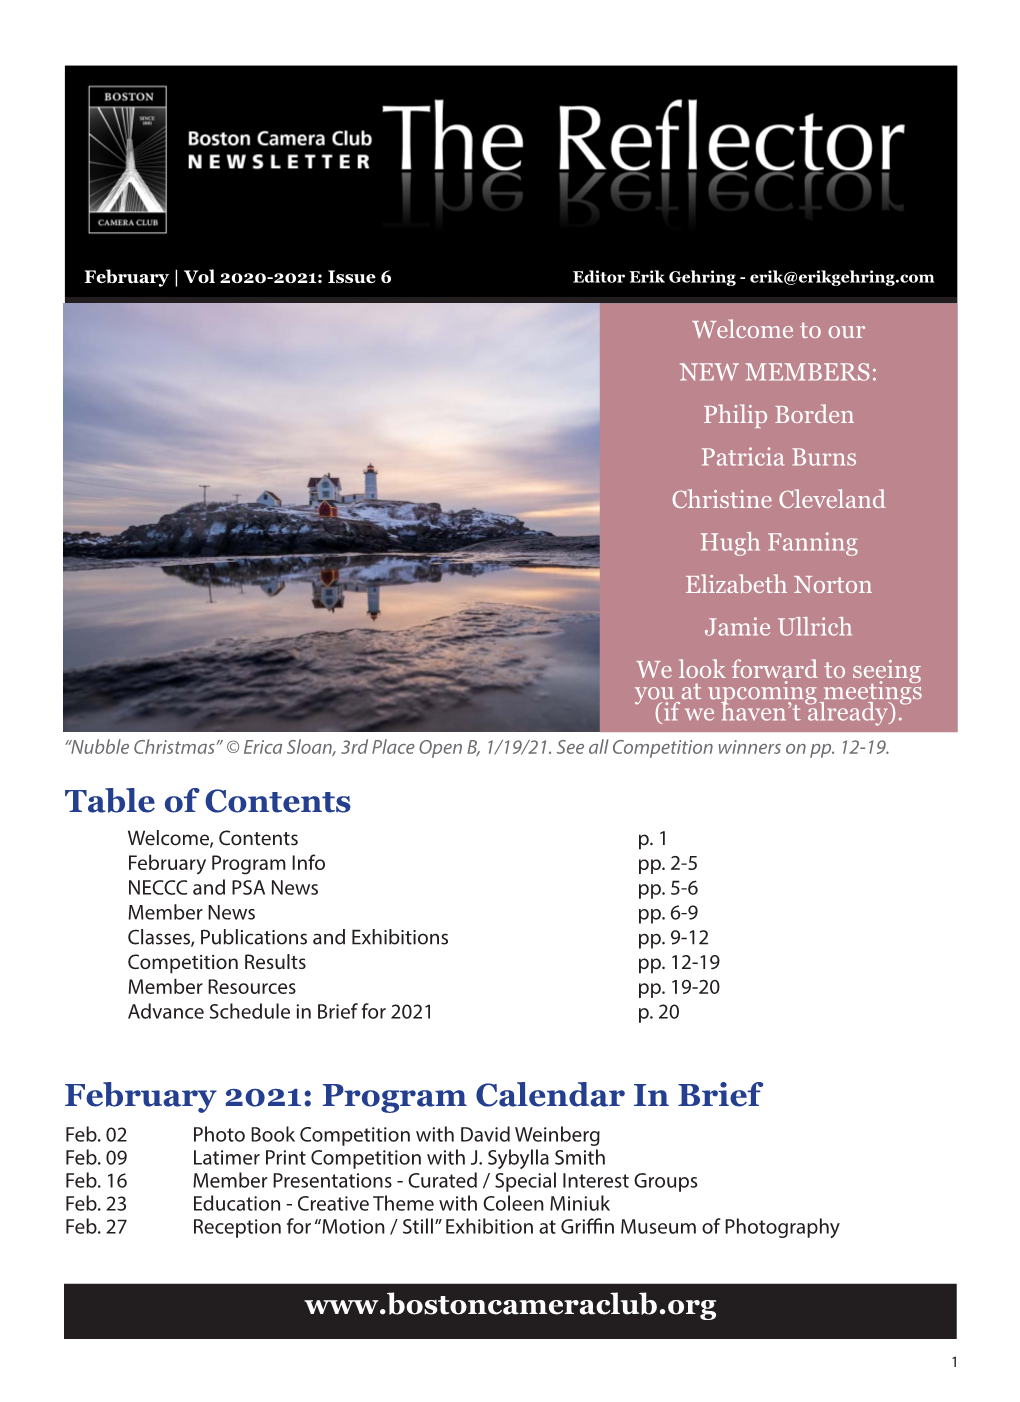 Table of Contents February 2021: Program